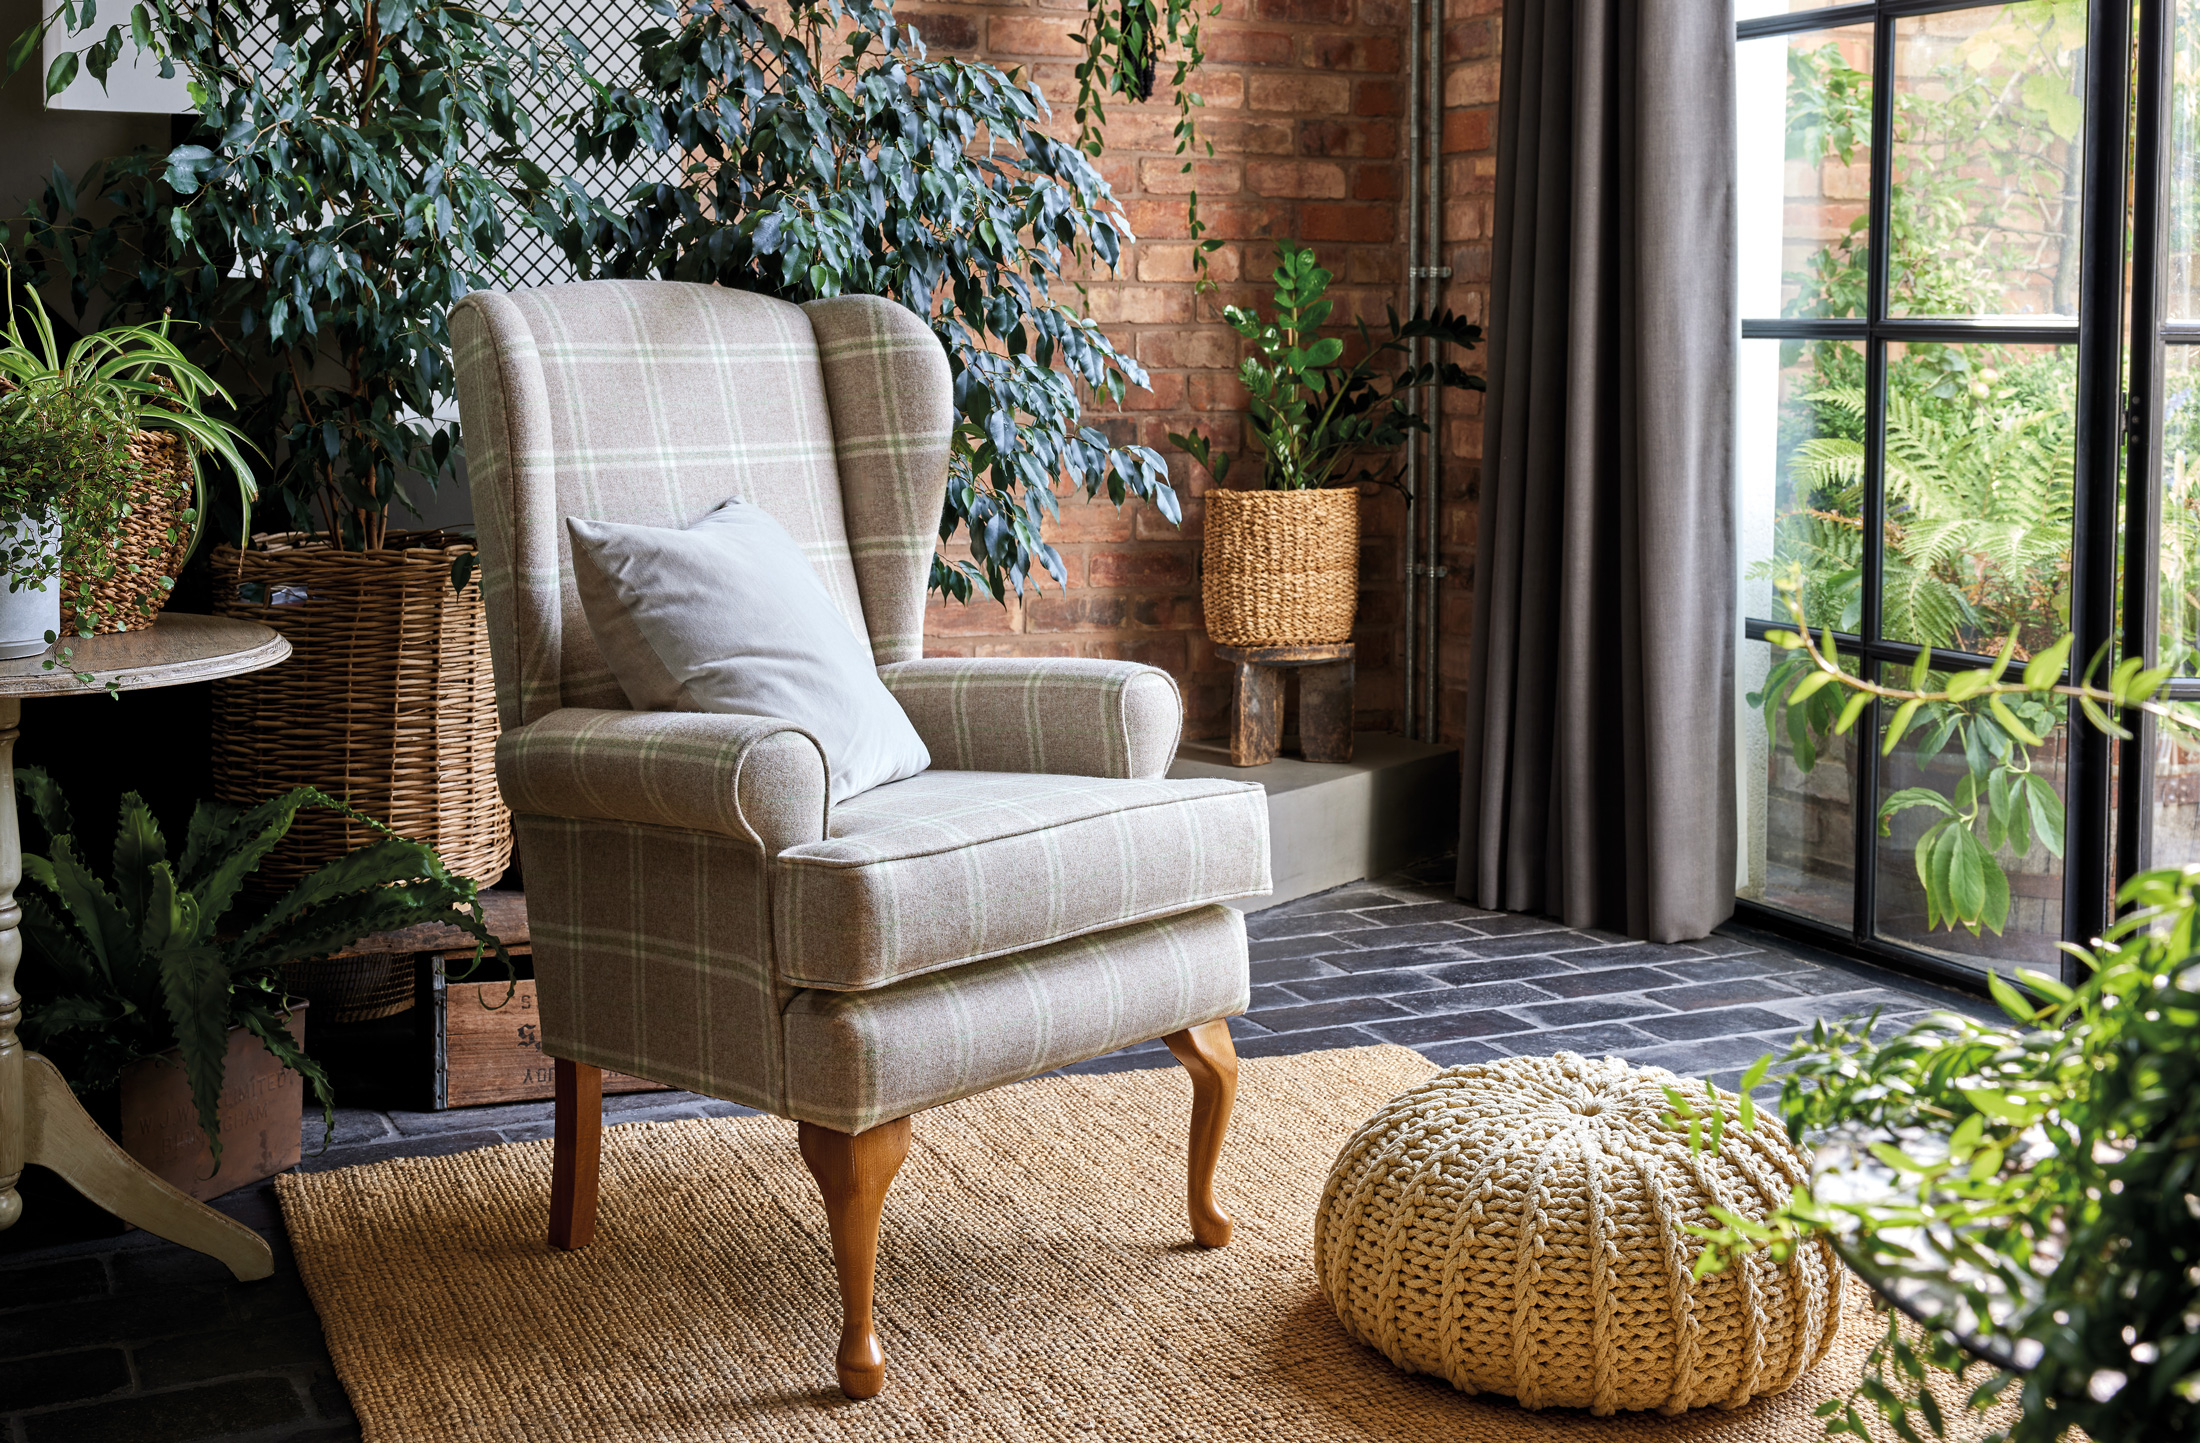 50+ Armchairs for Elderly & Guide How to Choose The Best - Foter